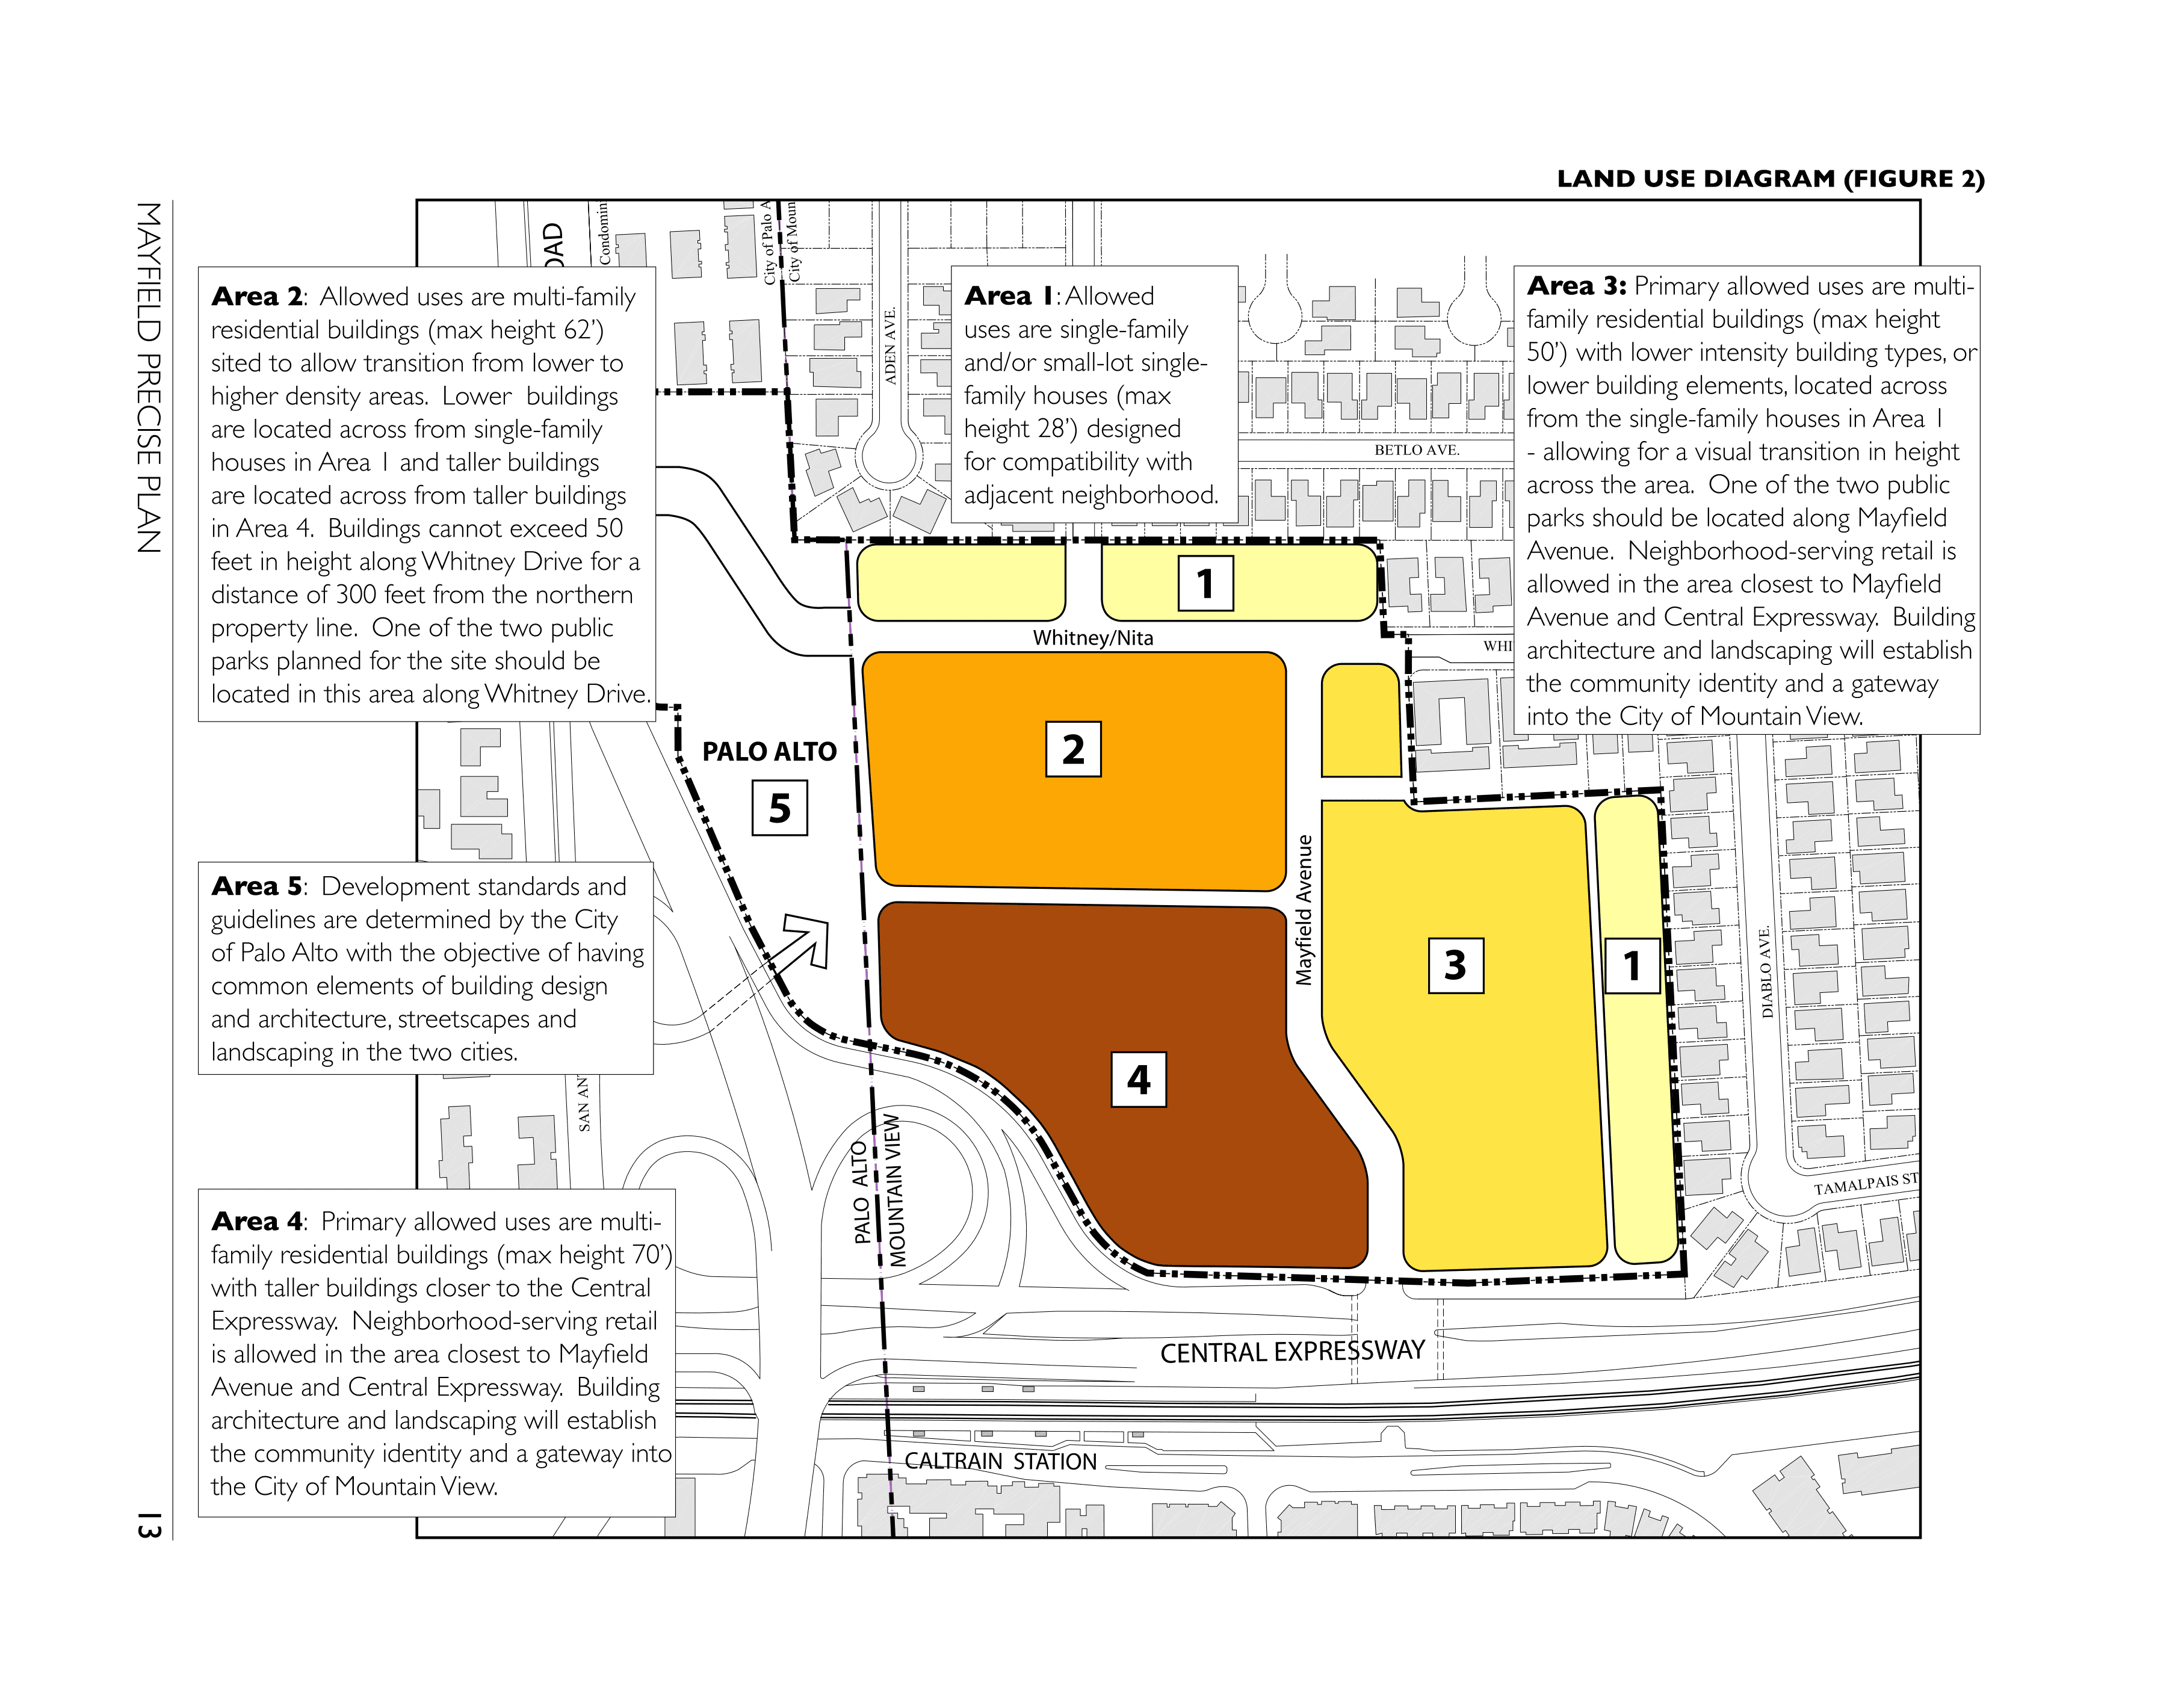 Mayfield plan: allowed uses